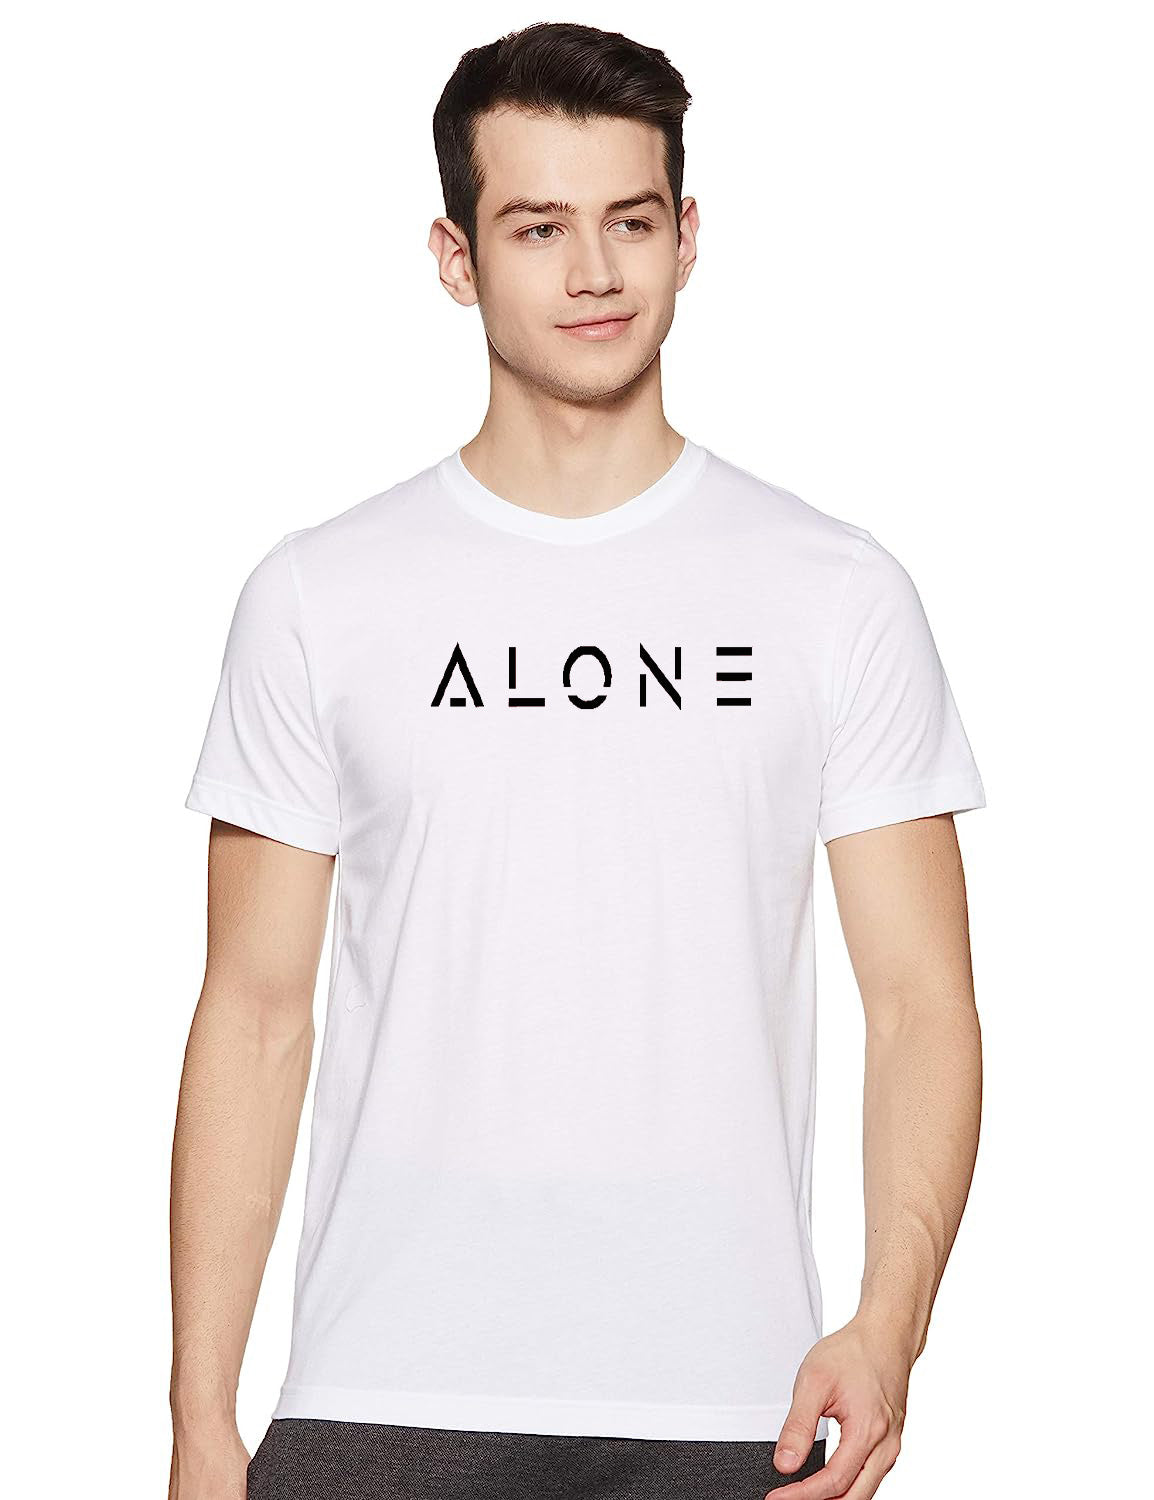 TheStyleO Cotton Half Sleeve Alone Tees| T-Shirt